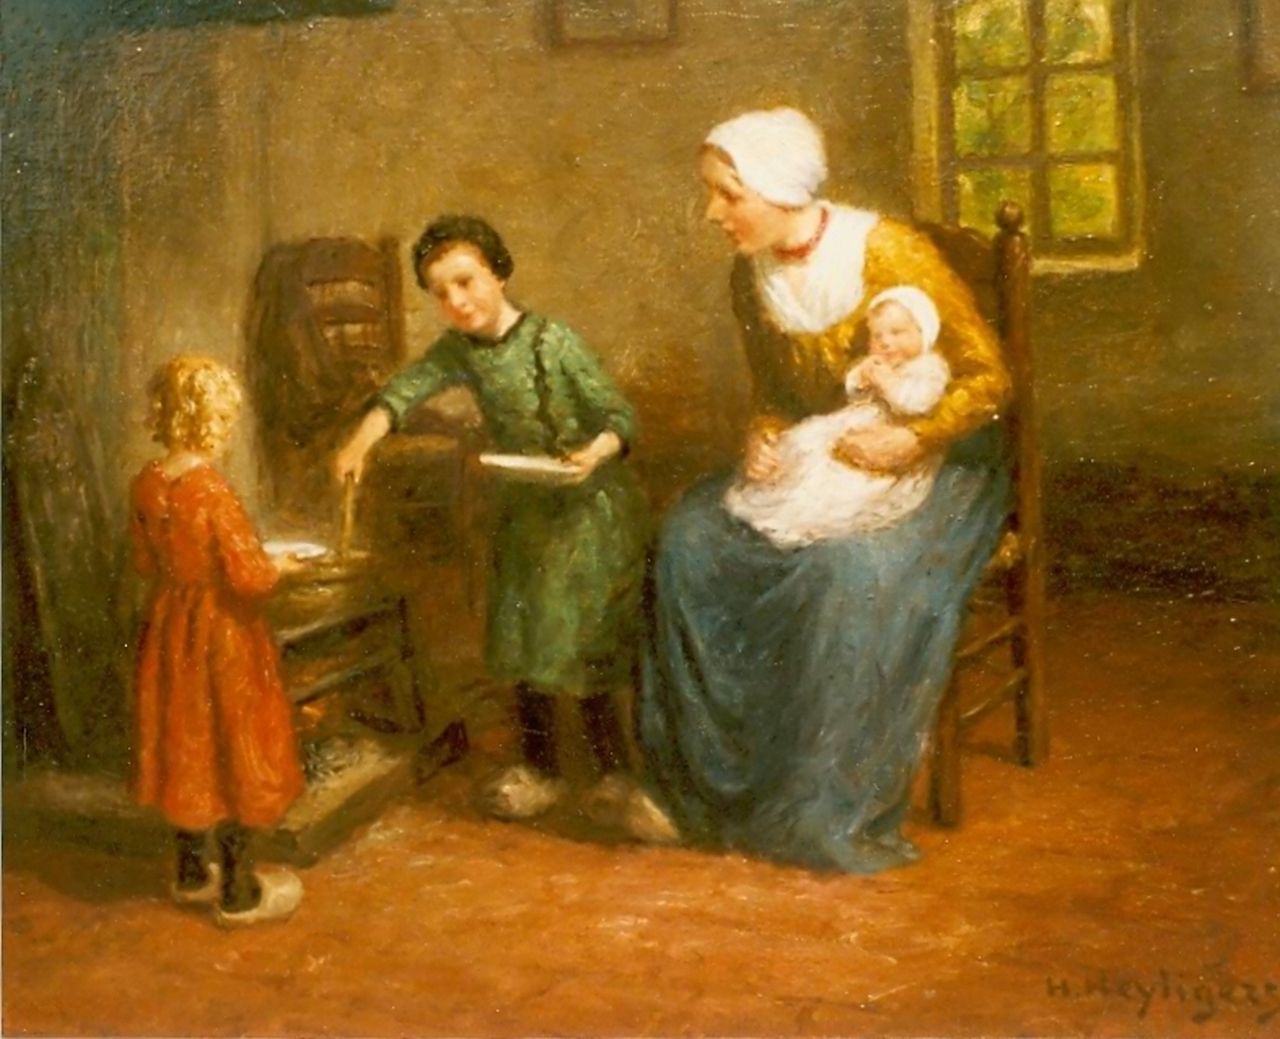 Heijligers H.  | Hendrik 'Henri' Heijligers, Interior with mother and child, oil on canvas 45.5 x 54.5 cm, signed l.r.